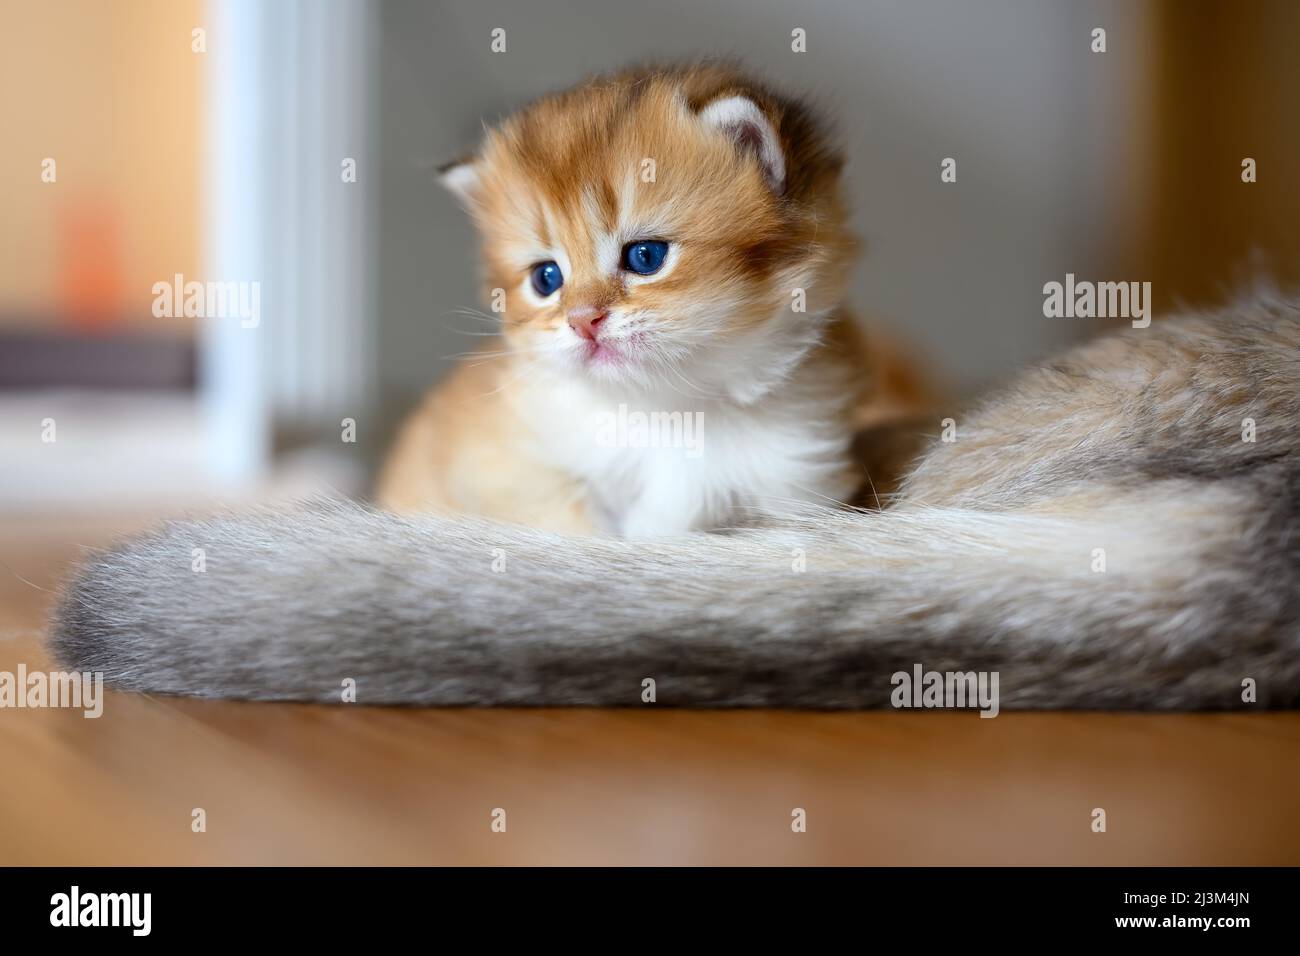 British Shorthair Golden kitten sitting on a white cloth on a wooden floor in the room, a baby kitten learning to walk and playing naughty by the moth Stock Photo